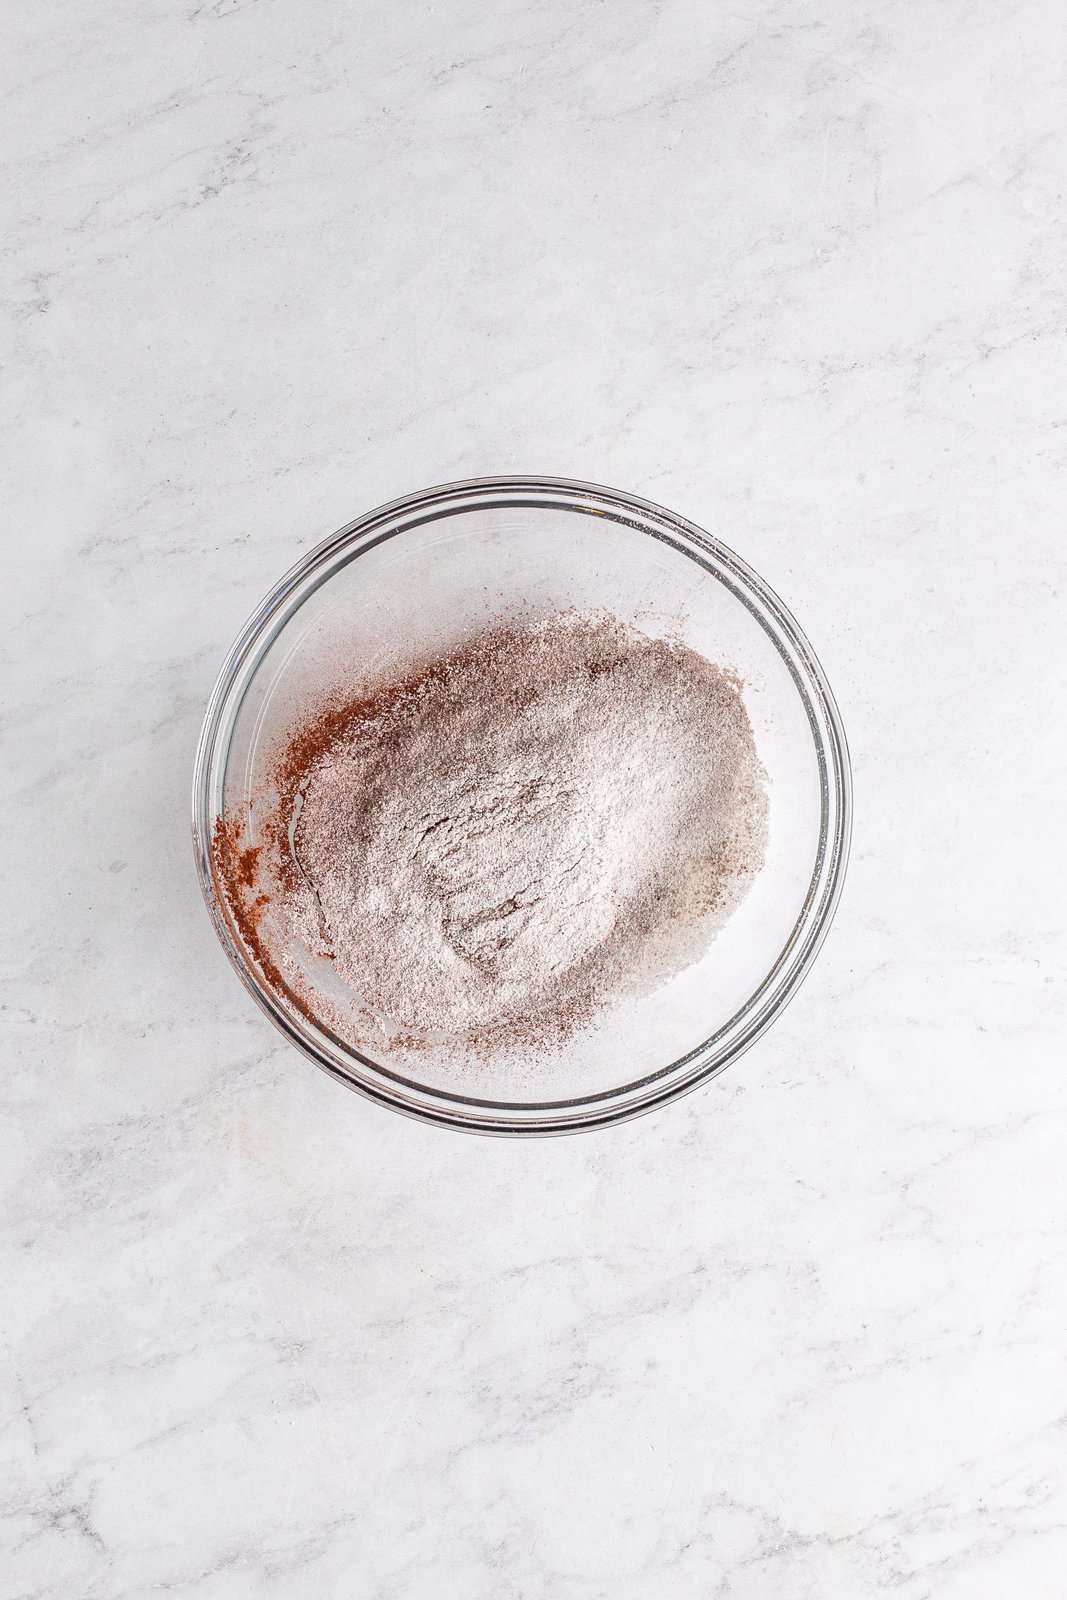 Sifted powdered sugar and cocoa powder in bowl.